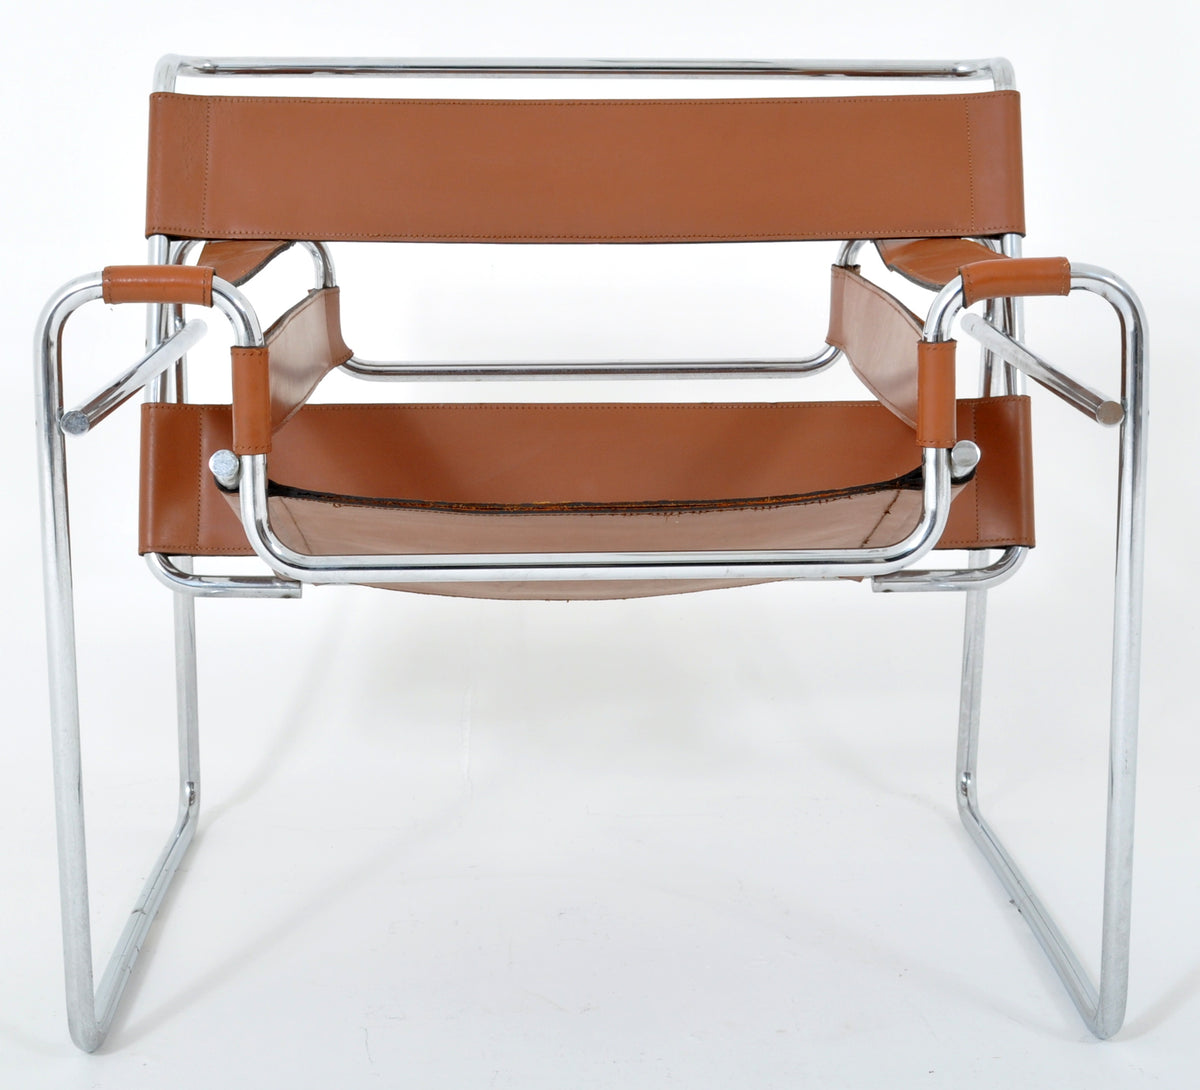 Pair of Vintage Wassily Chairs by Marcel Breuer and Produced by Knoll